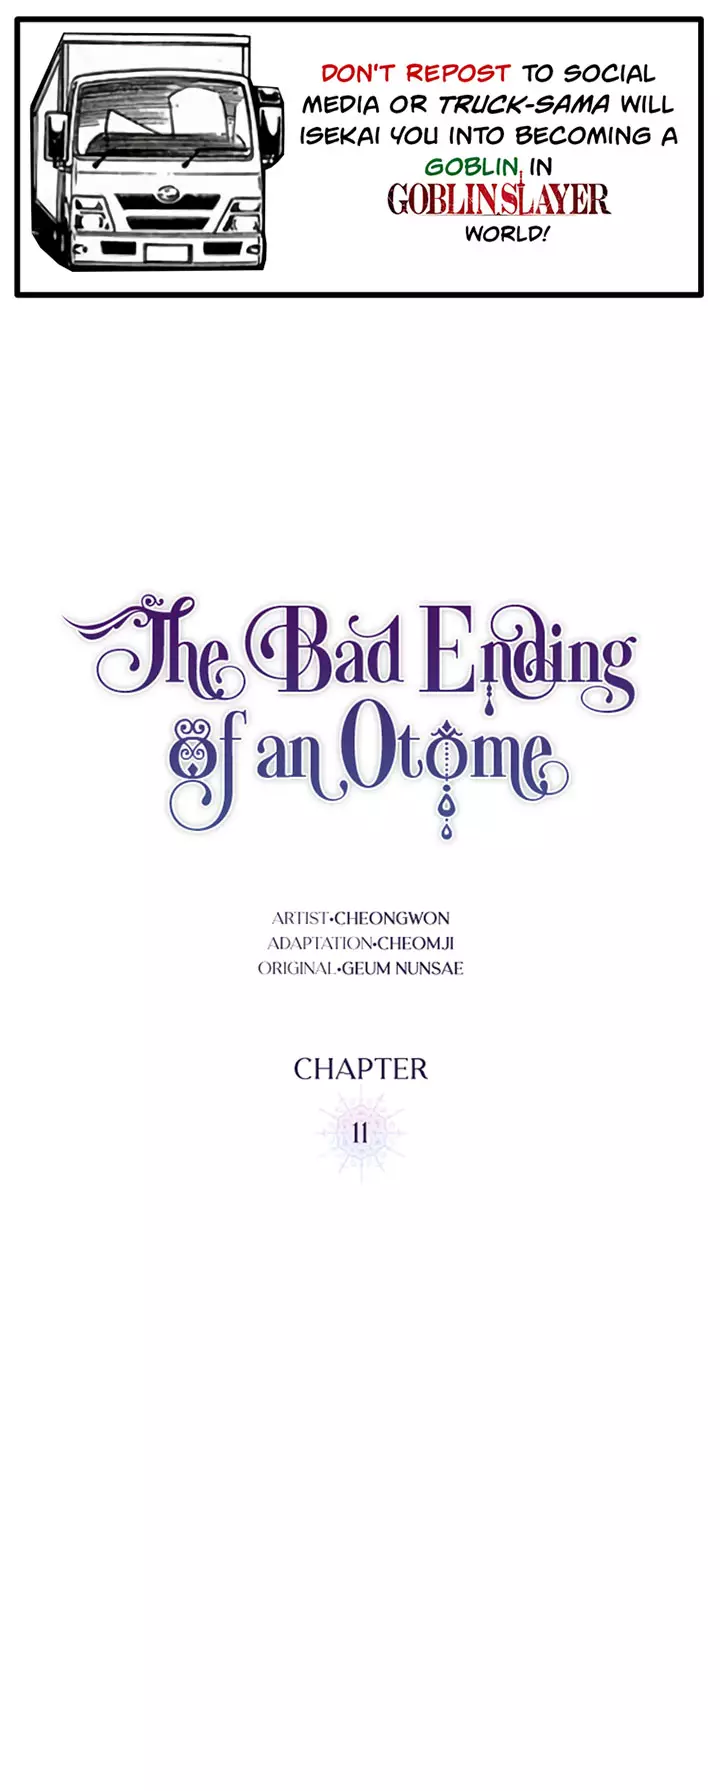 The Bad Ending Of The Otome Game - 11 page 1-8a2959af